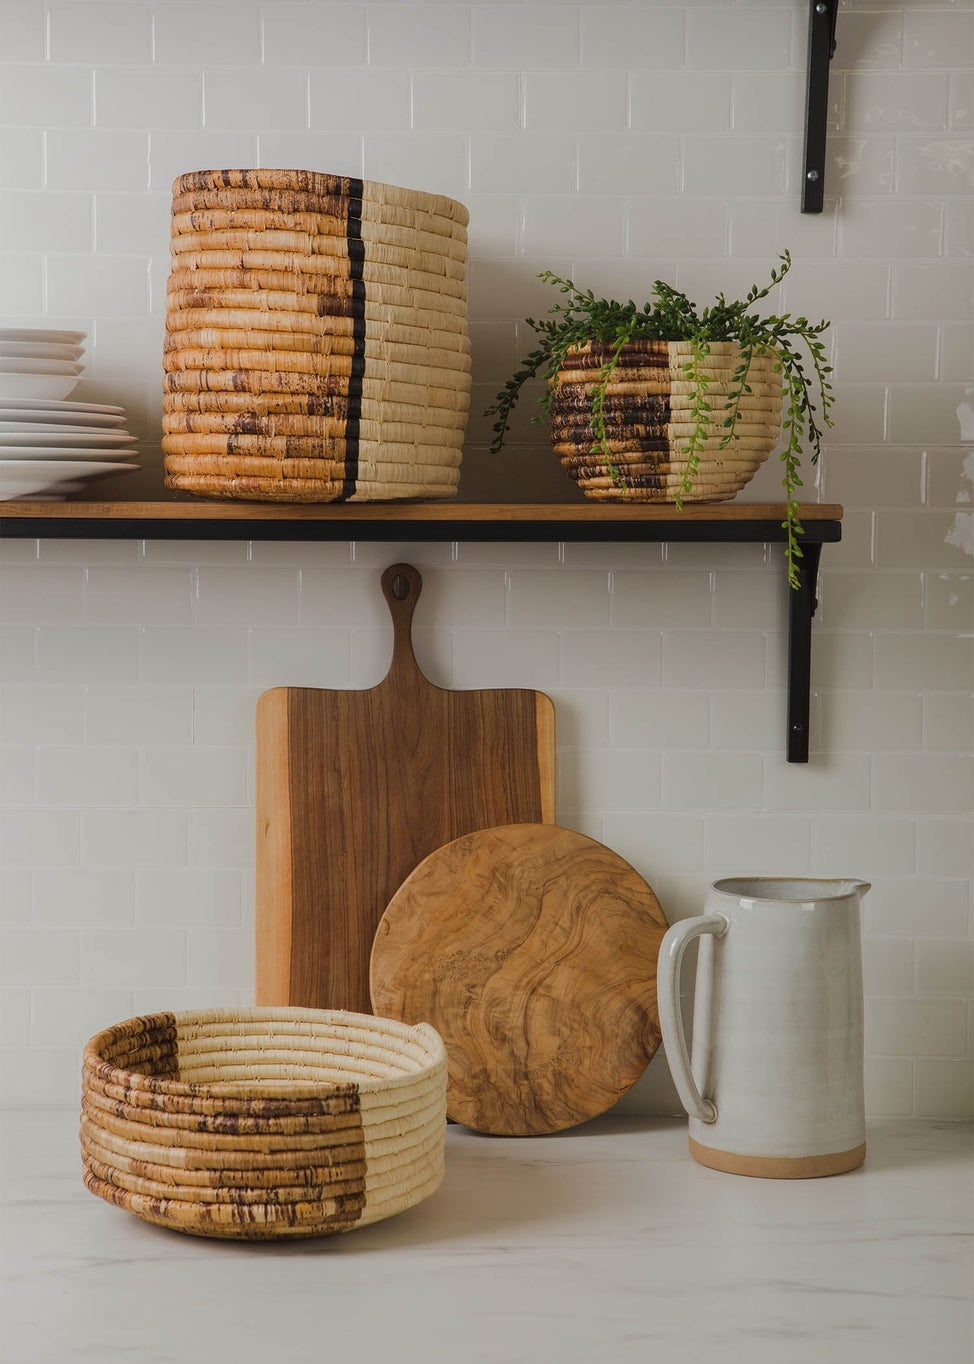 These chic home accessories can be beautiful accent decor in your home office or the perfect size for a deep fruit basket on your countertop. Handmade in Rwanda from all natural fibers of Raffia.